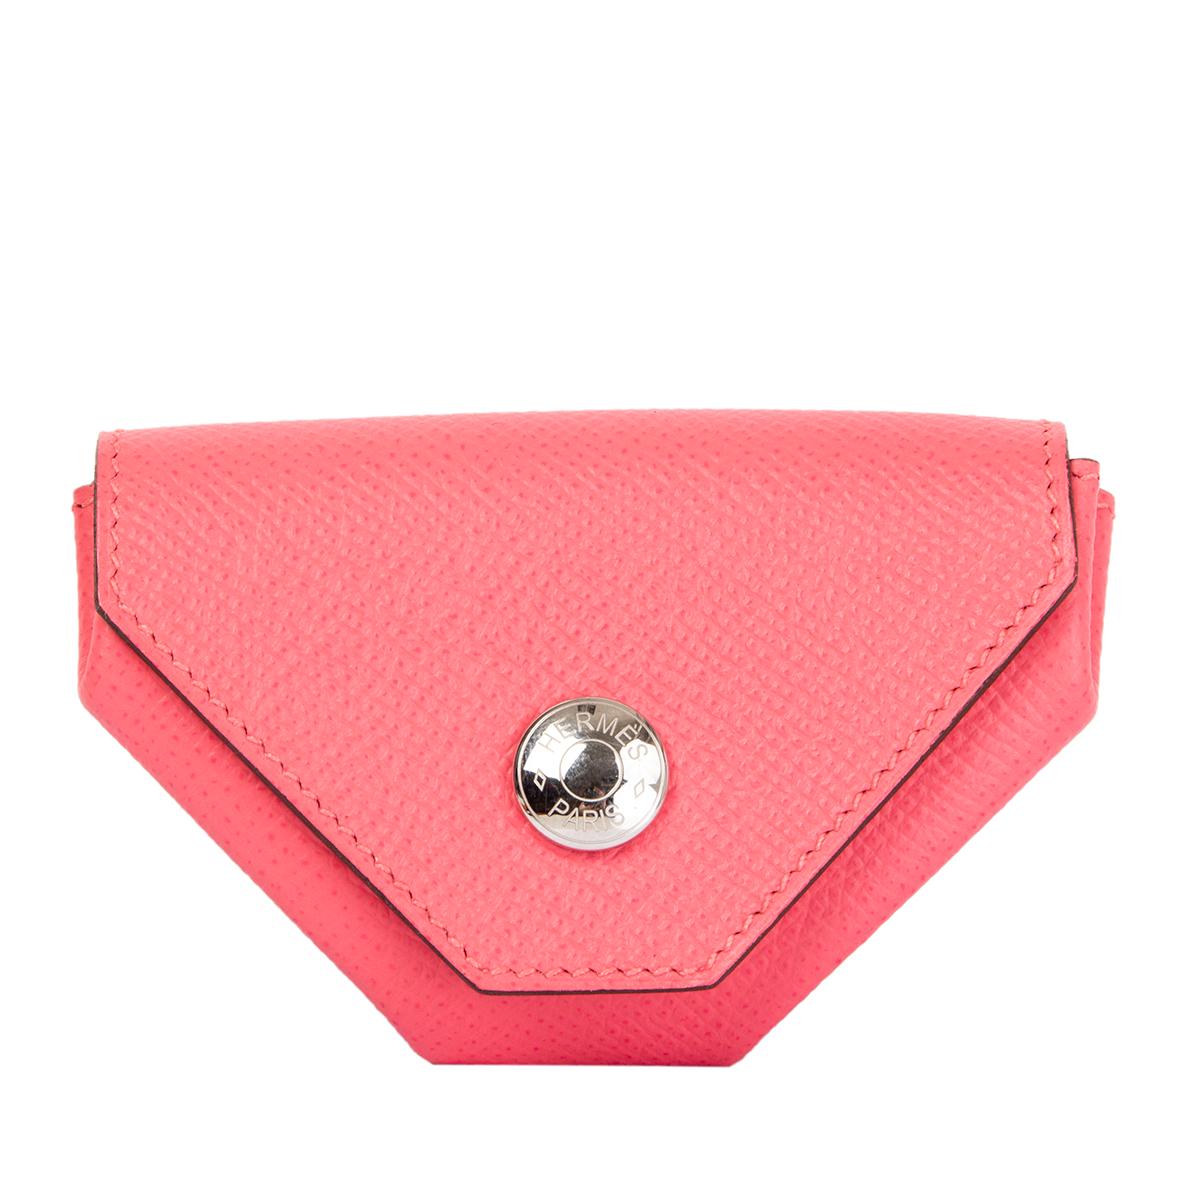 Hermes '24' coinwallet in Rose Azalee pink Veau Epsom leather. Closes with a snap-button on the front. Brand new. Comes with box.

Width 8cm (3.1in)
Height 5.5cm (2.1in)
Depth 2cm (0.8in)
Hardware Palladium